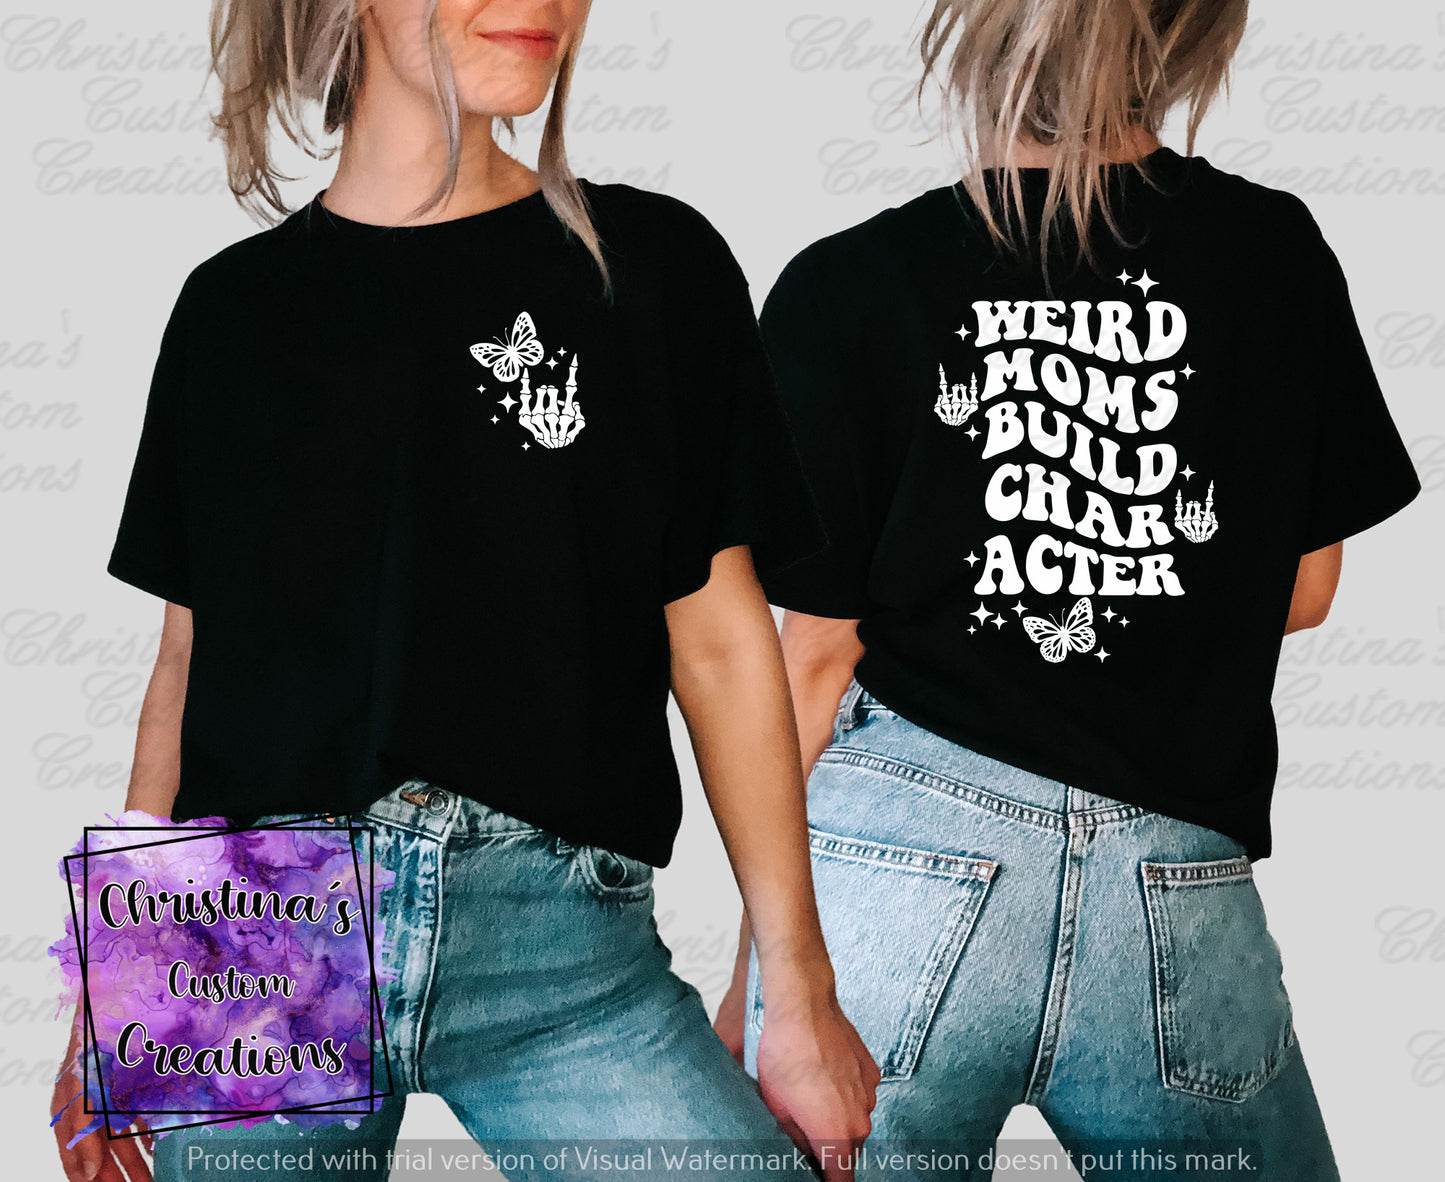 Weird Mom's Build Character T-Shirt | Retro Mama Shirt | Fast Shipping | Super Soft Shirts for Women | Gift for Mom